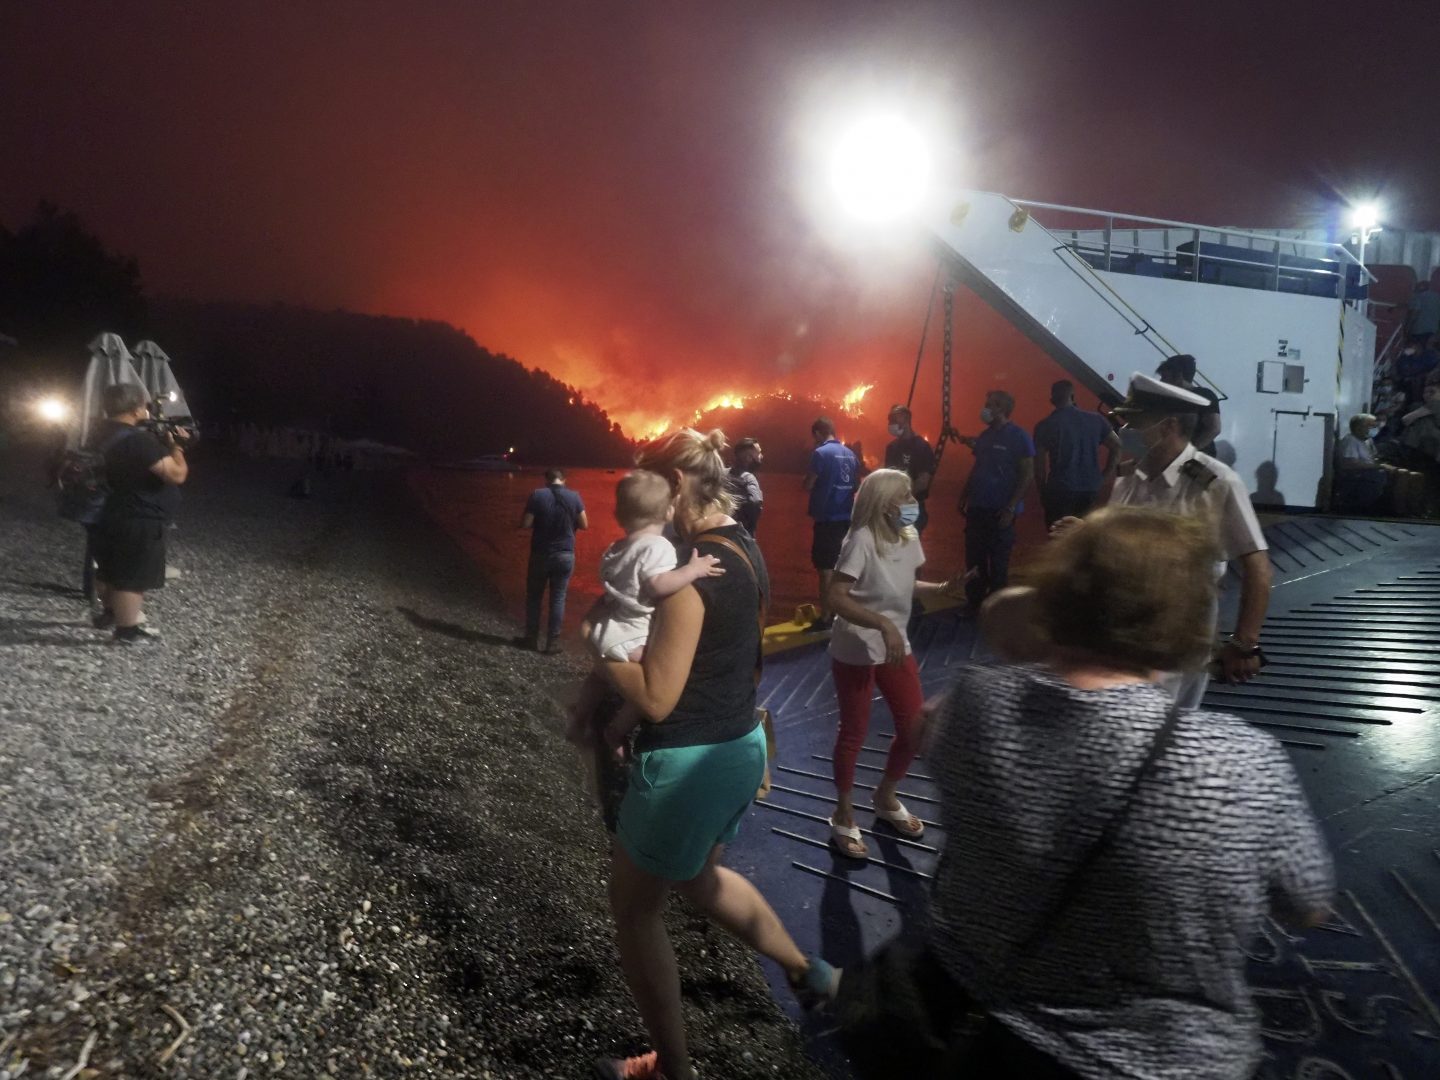 People embark a ferry during an evacuation from Kochyli beach as wildfire approaches near Limni village on the island of Evia, about 160 kilometers (100 miles) north of Athens, Greece, Friday, Aug. 6, 2021. Thousands of people fled wildfires burning out of control in Greece and Turkey on Friday, including a major blaze just north of the Greek capital of Athens that claimed one life, as a protracted heat wave left forests tinder-dry and flames threatened populated areas and electricity installations.